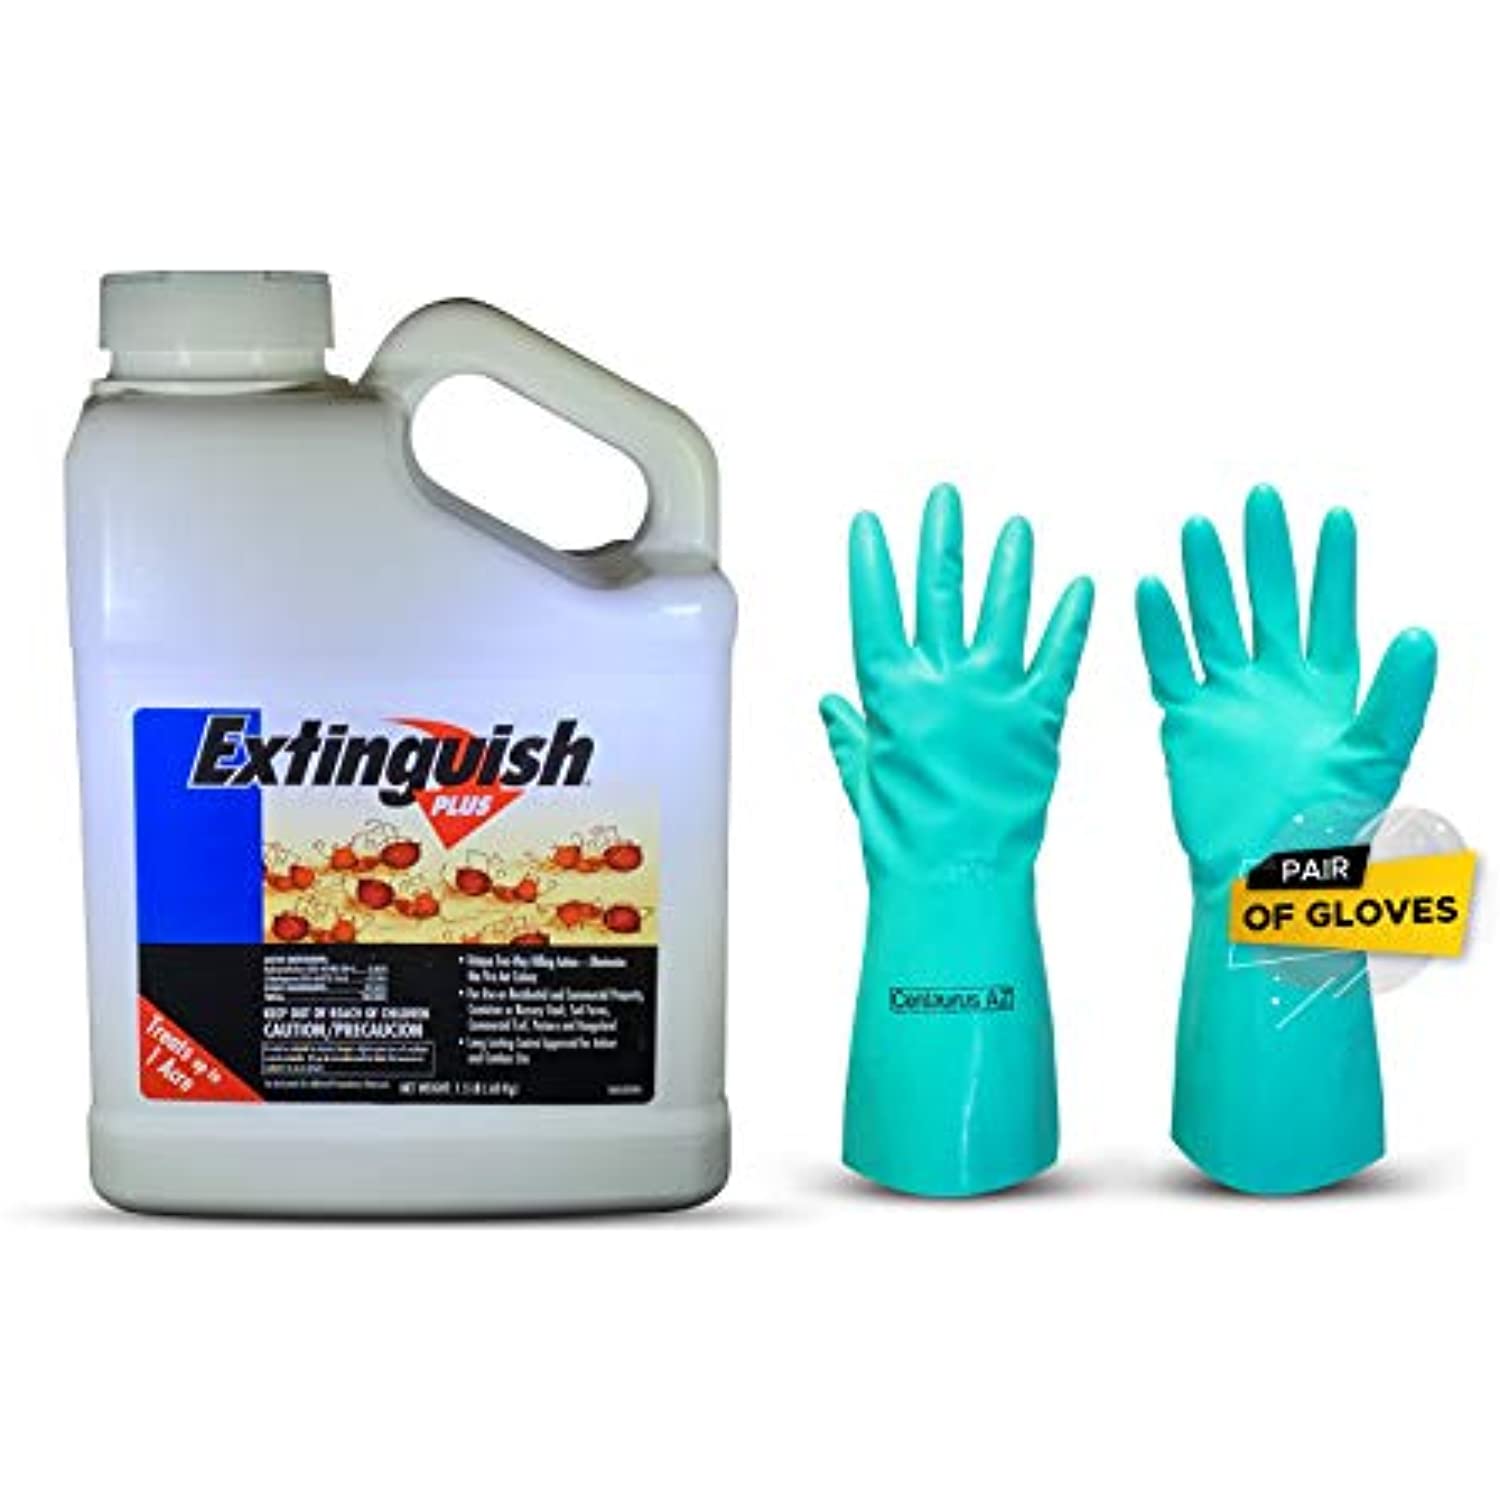 Centaurus AZ Extinguish Plus Fire Ant Bait Fast Acting and Long Lasting Prevention Eliminates Colonies Kills The Queen and Workers Ants Quick Knockdown Plus Chemical Resistant Gloves, 1.5 LB